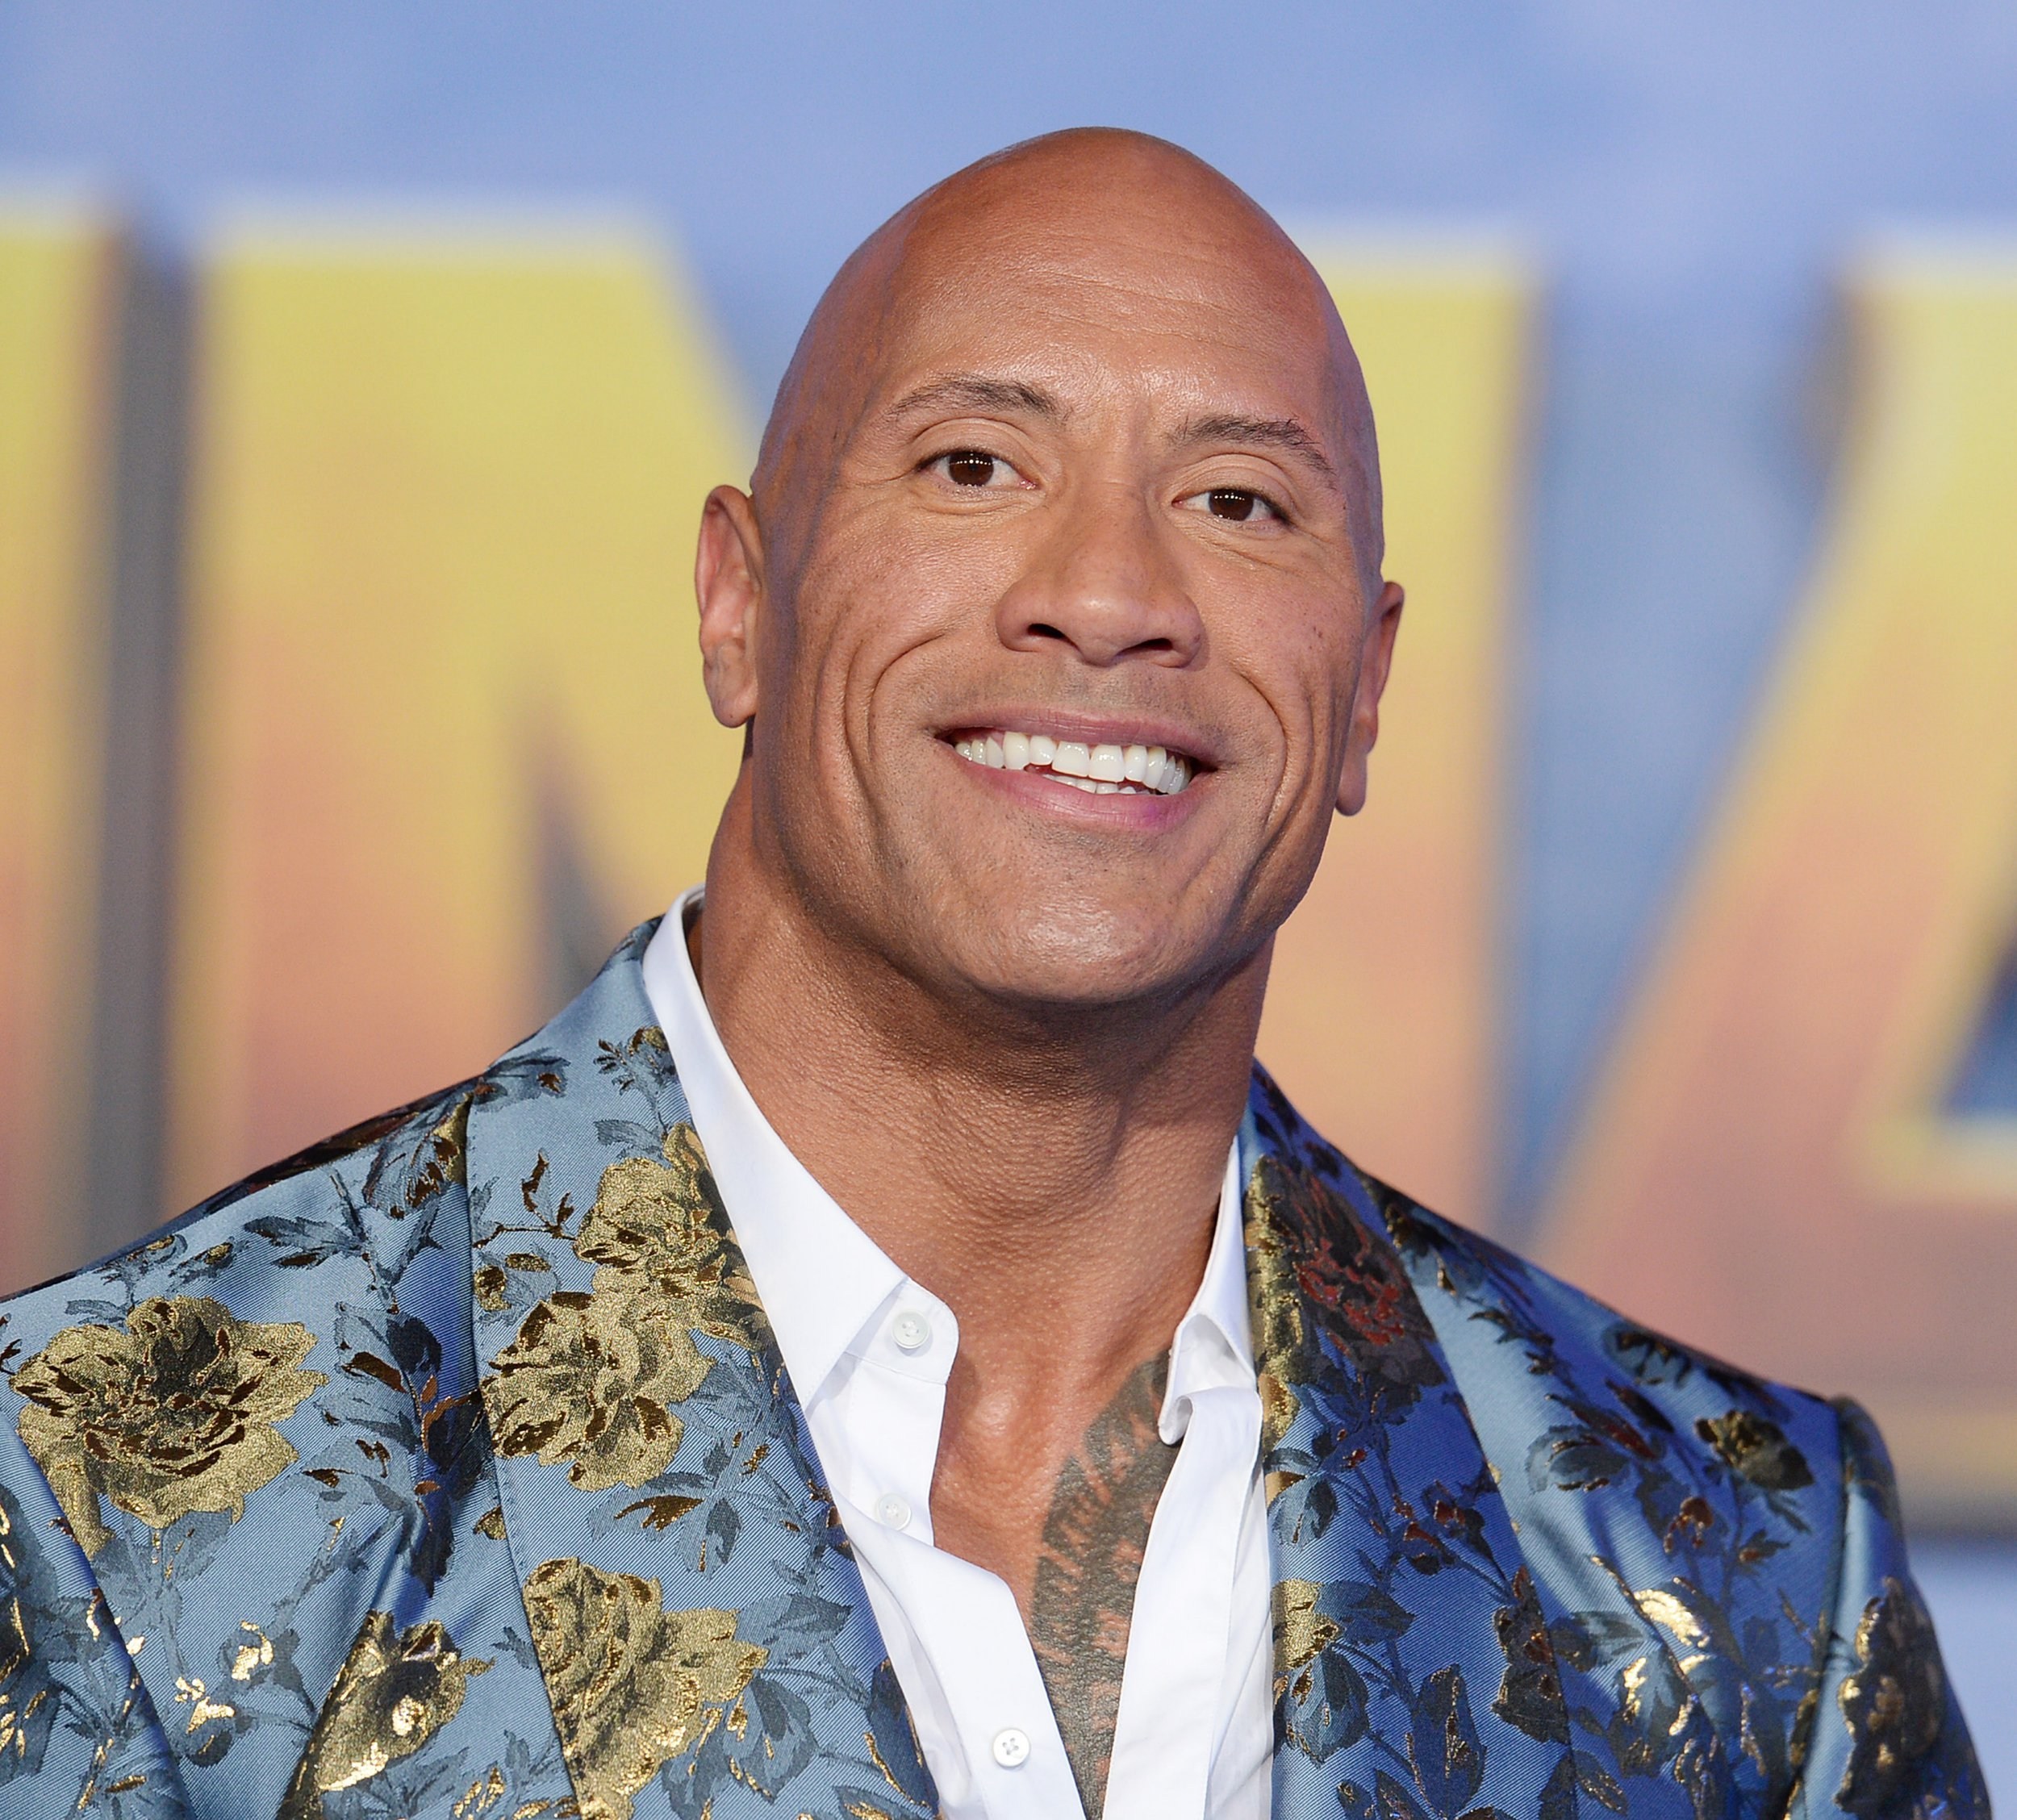 The Rock relives difficult ‘tough love’ childhood memories in Young Rock sitcom